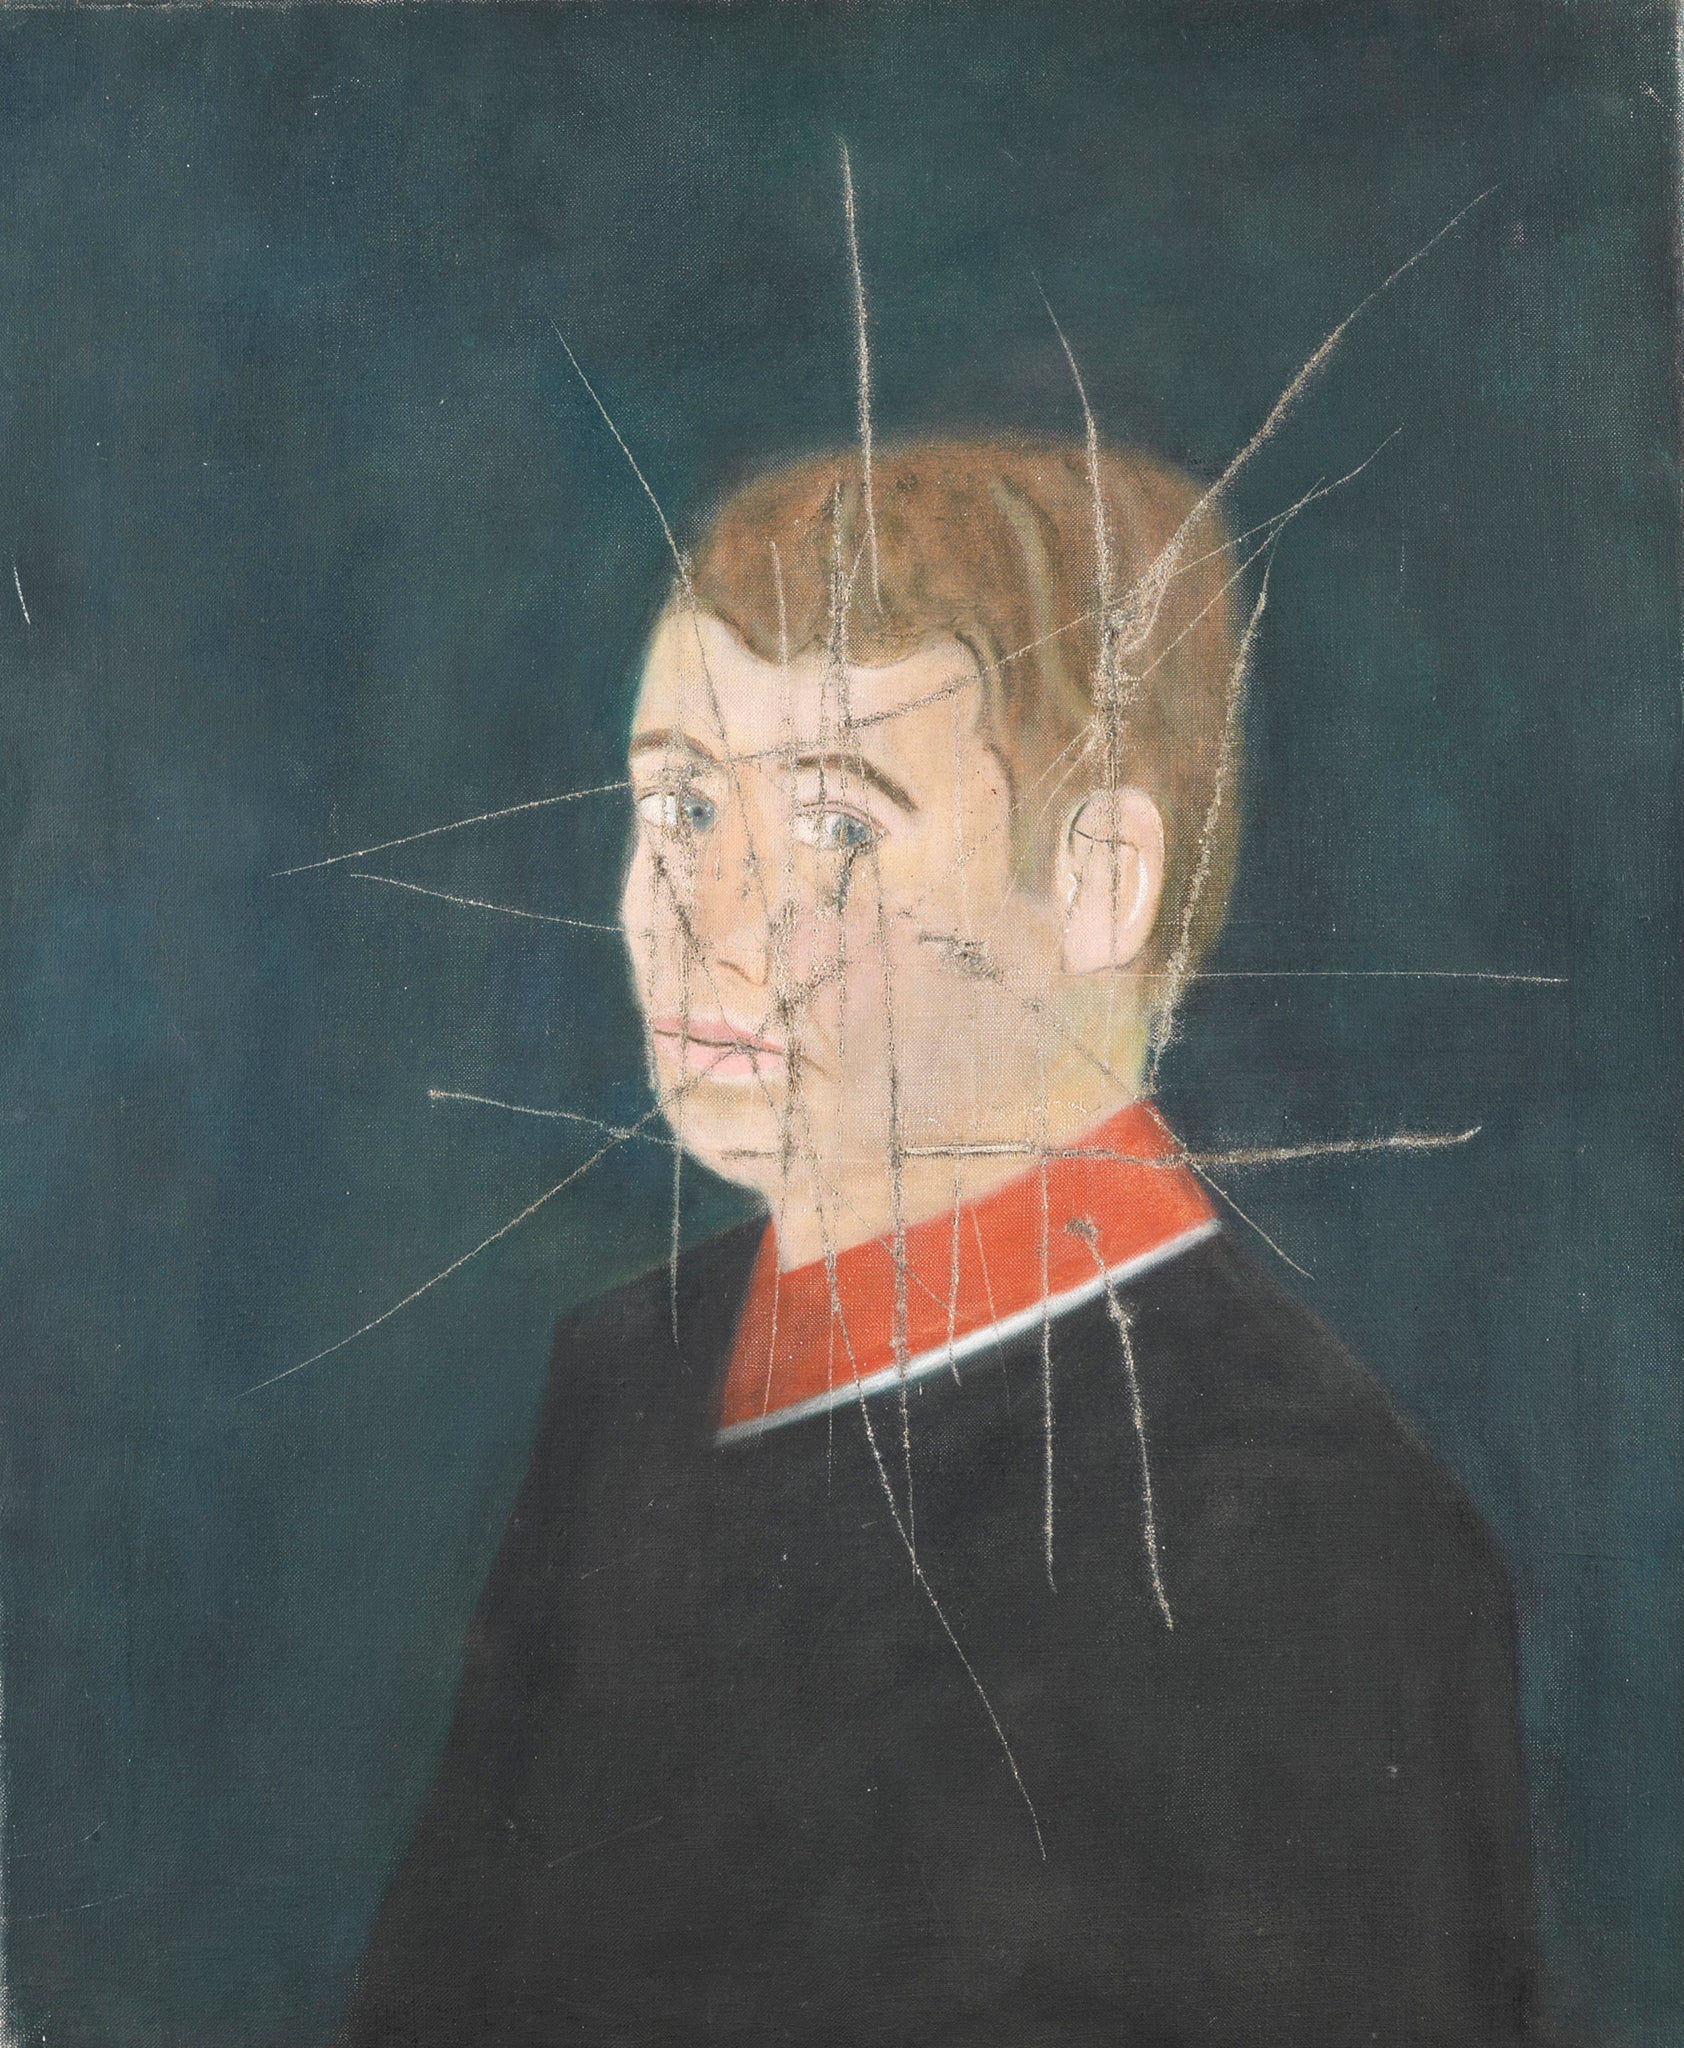 A self-portrait which had been destroyed by its artist, the late Craigie Aitchison, has been bought by the National Portrait Gallery